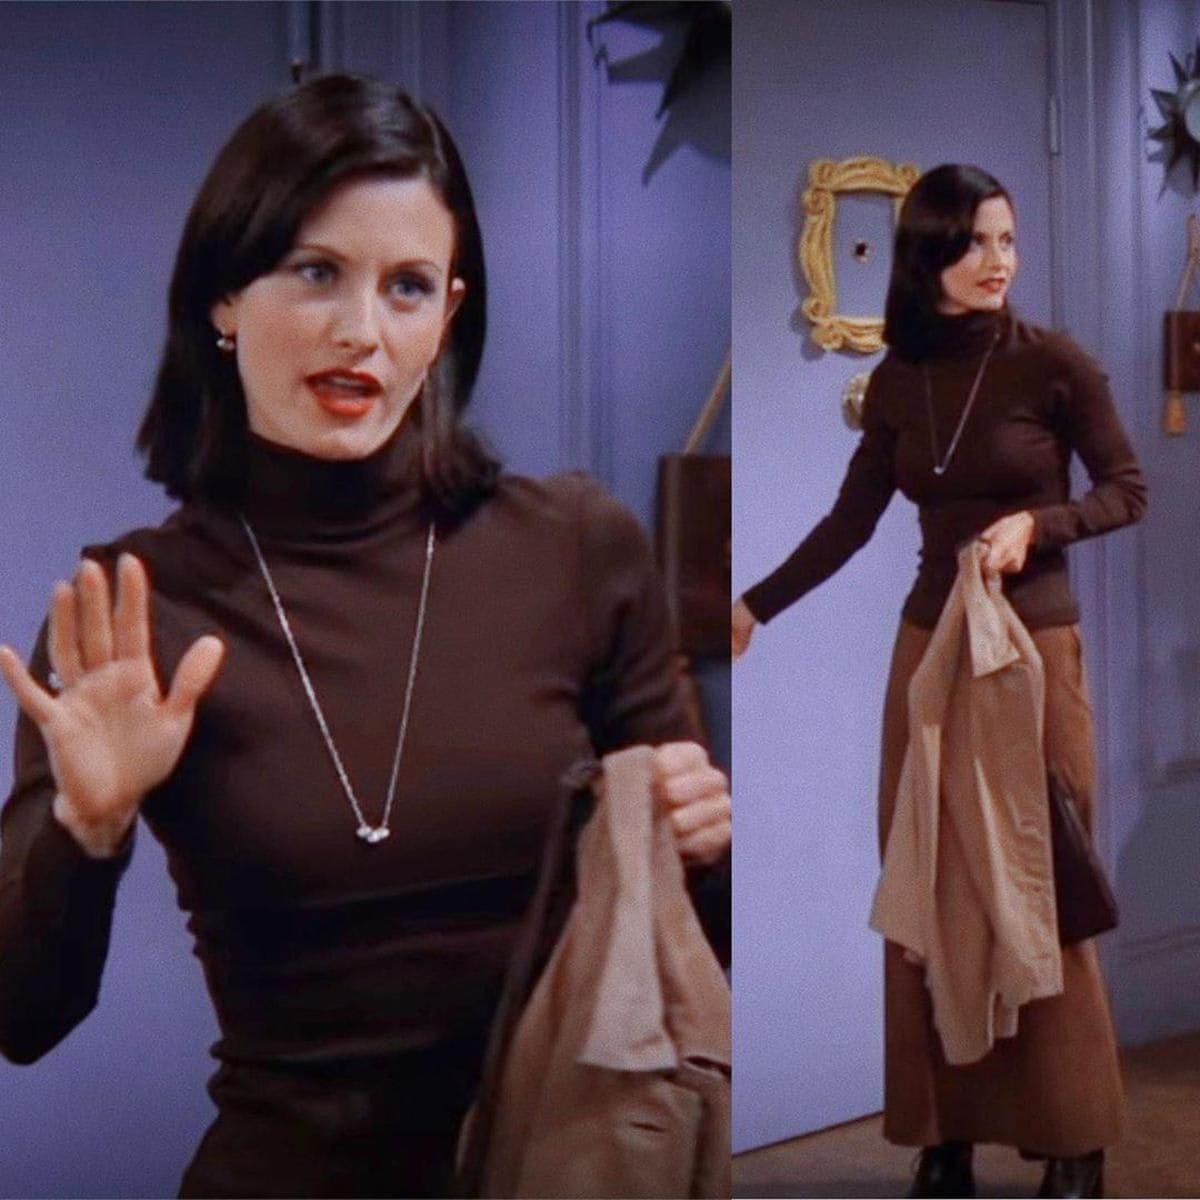 Stylish TV characters from 90s and 00s